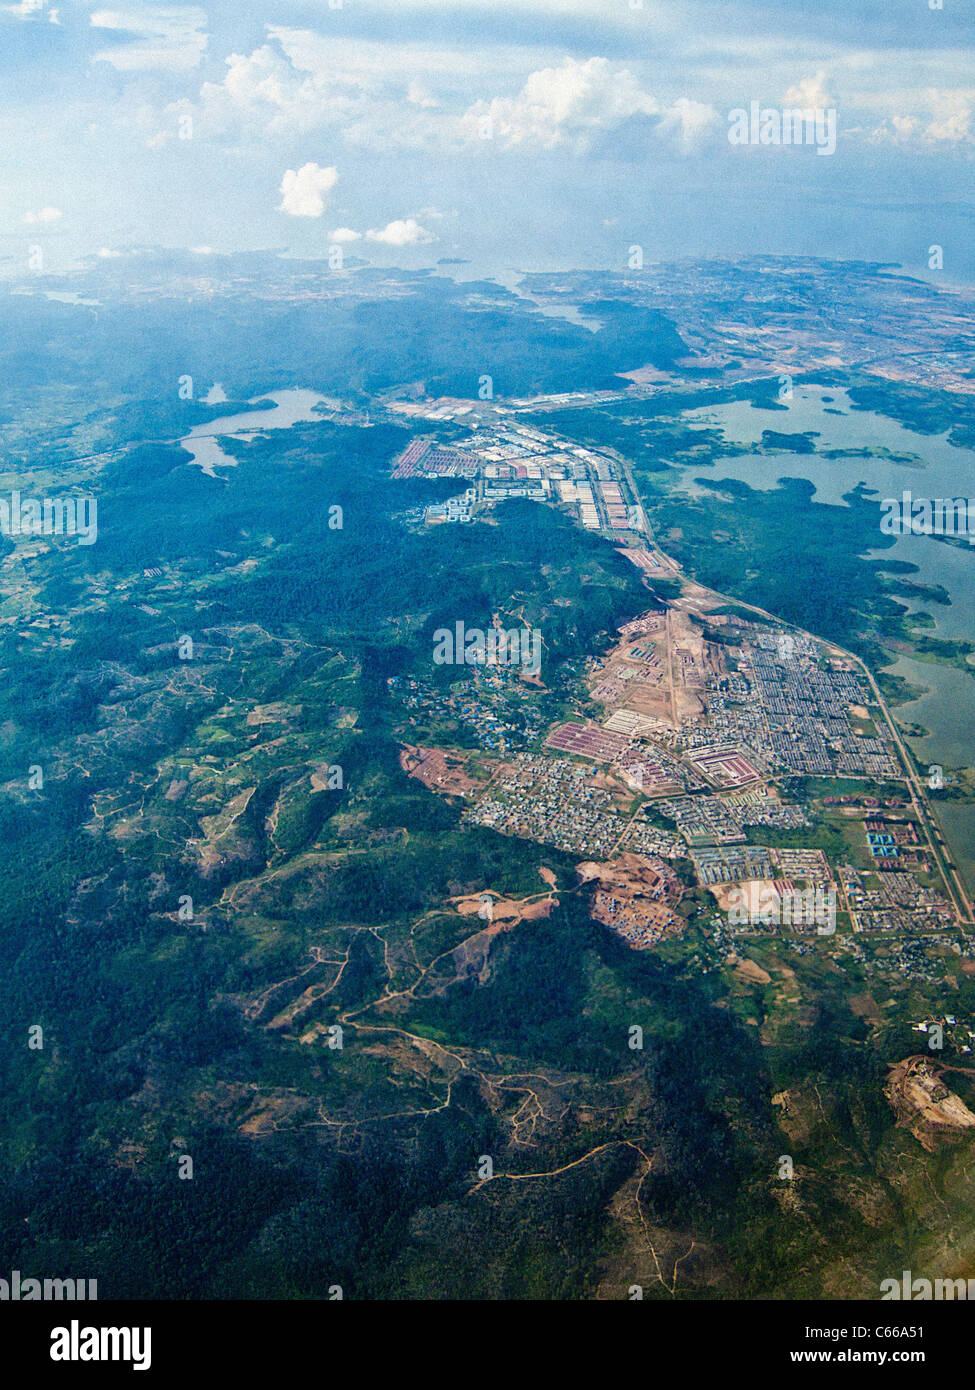 Aerial view of the Island of Batam in Indonesia. Stock Photo